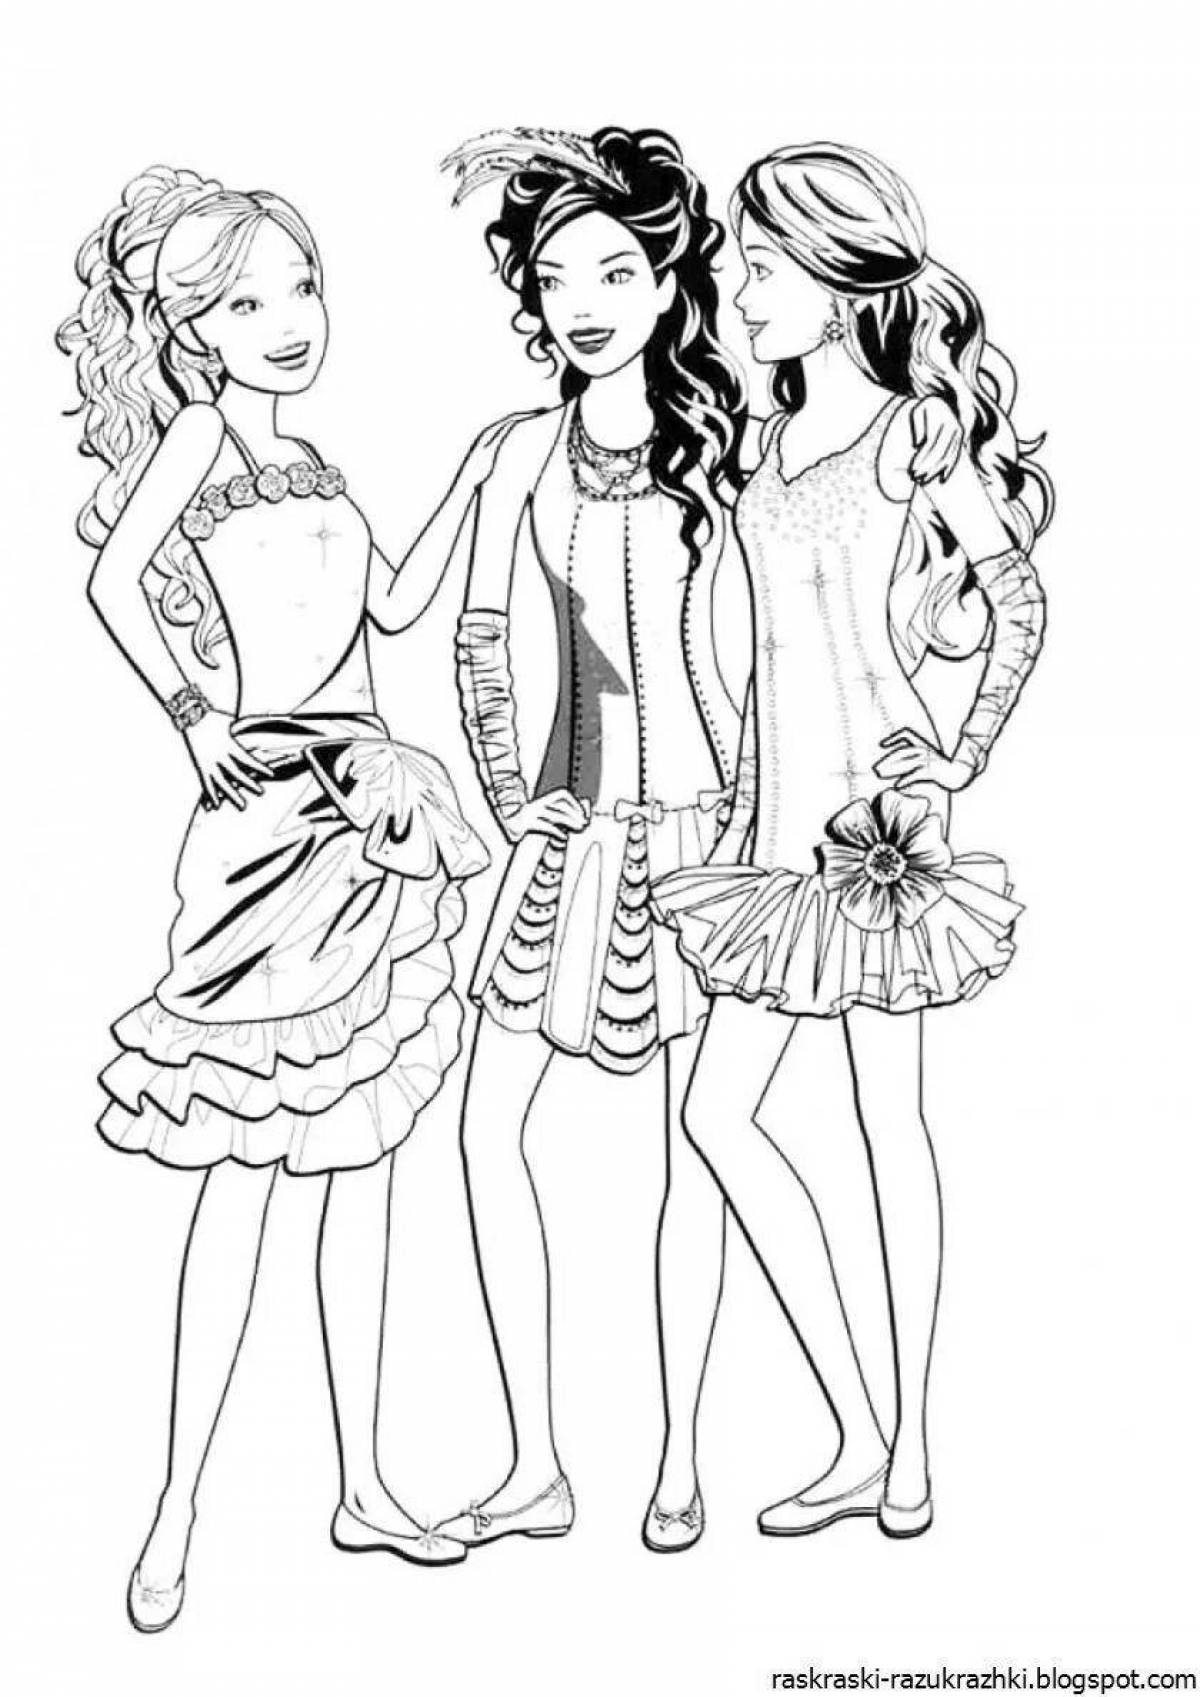 Playful coloring for girls and girlfriends